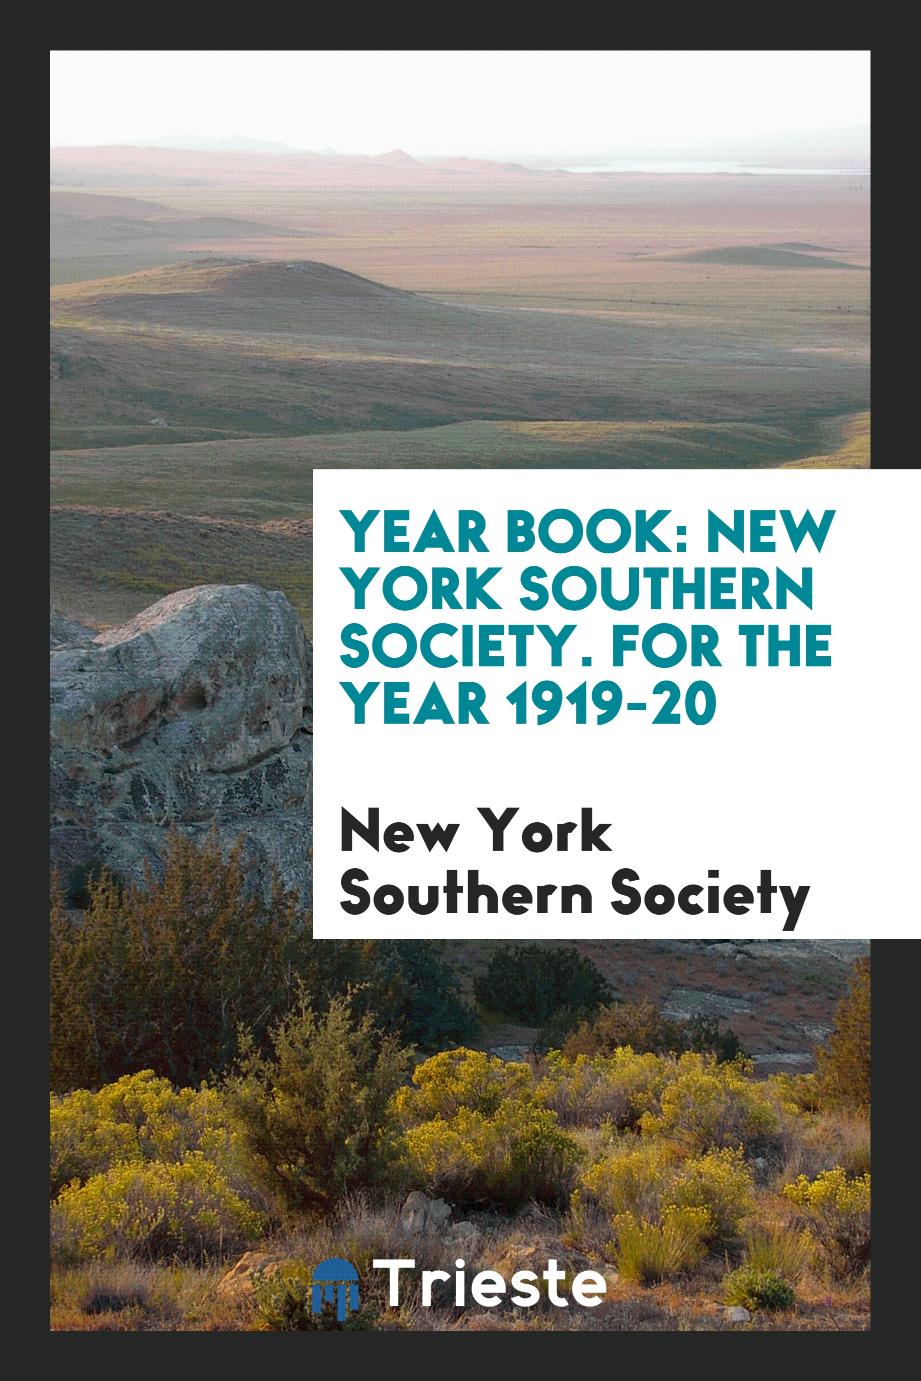 Year Book: New York Southern Society. For the Year 1919-20